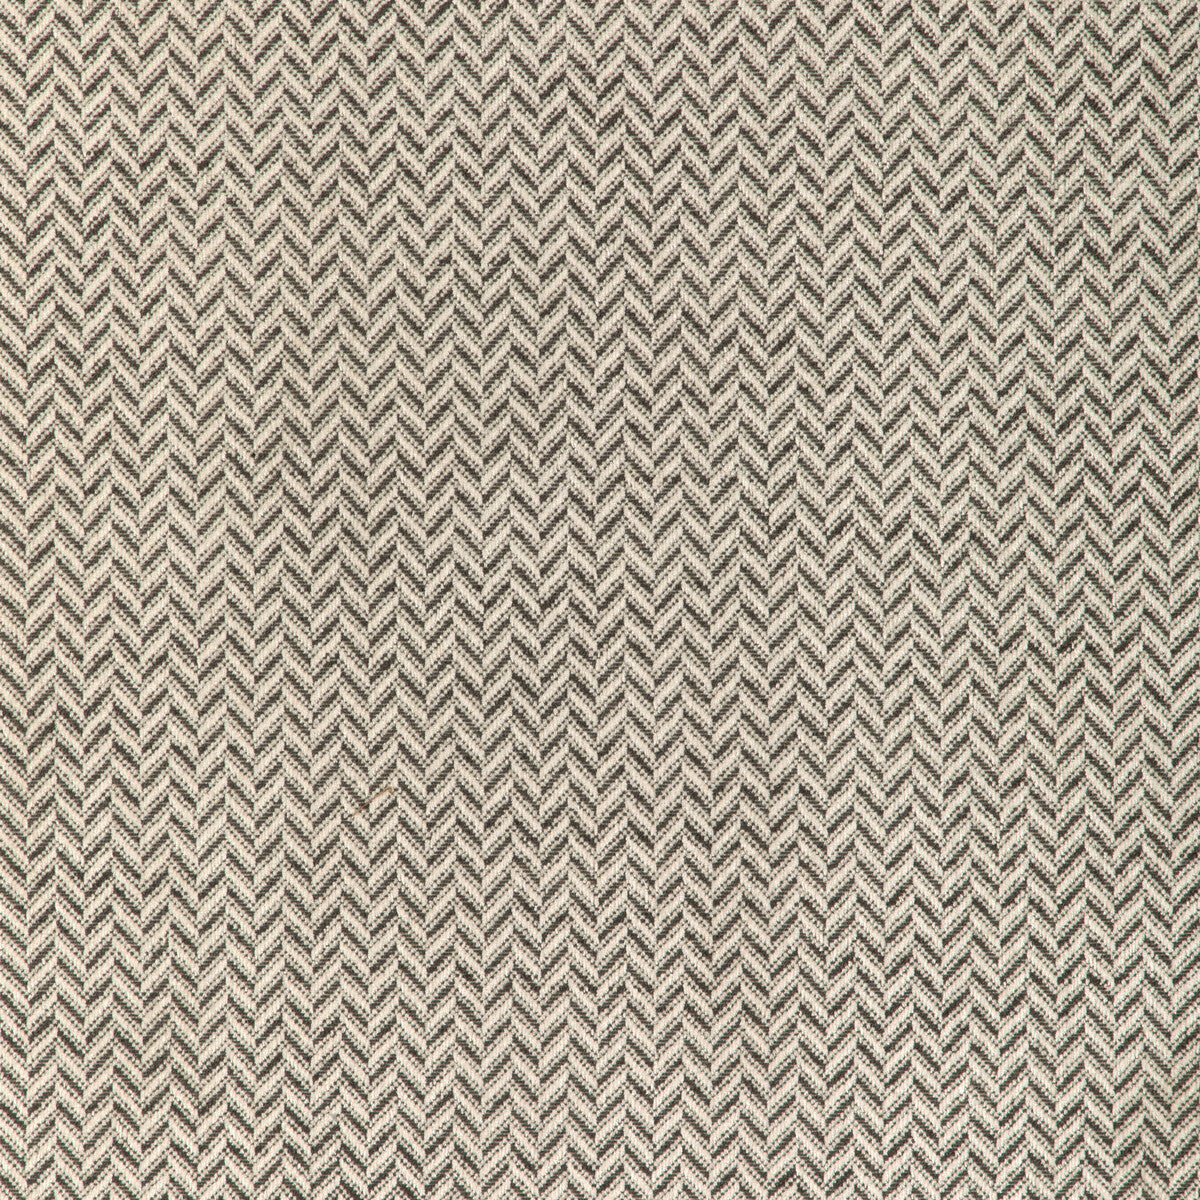 Kravet Design fabric in 37195-1101 color - pattern 37195.1101.0 - by Kravet Design in the Woven Colors collection